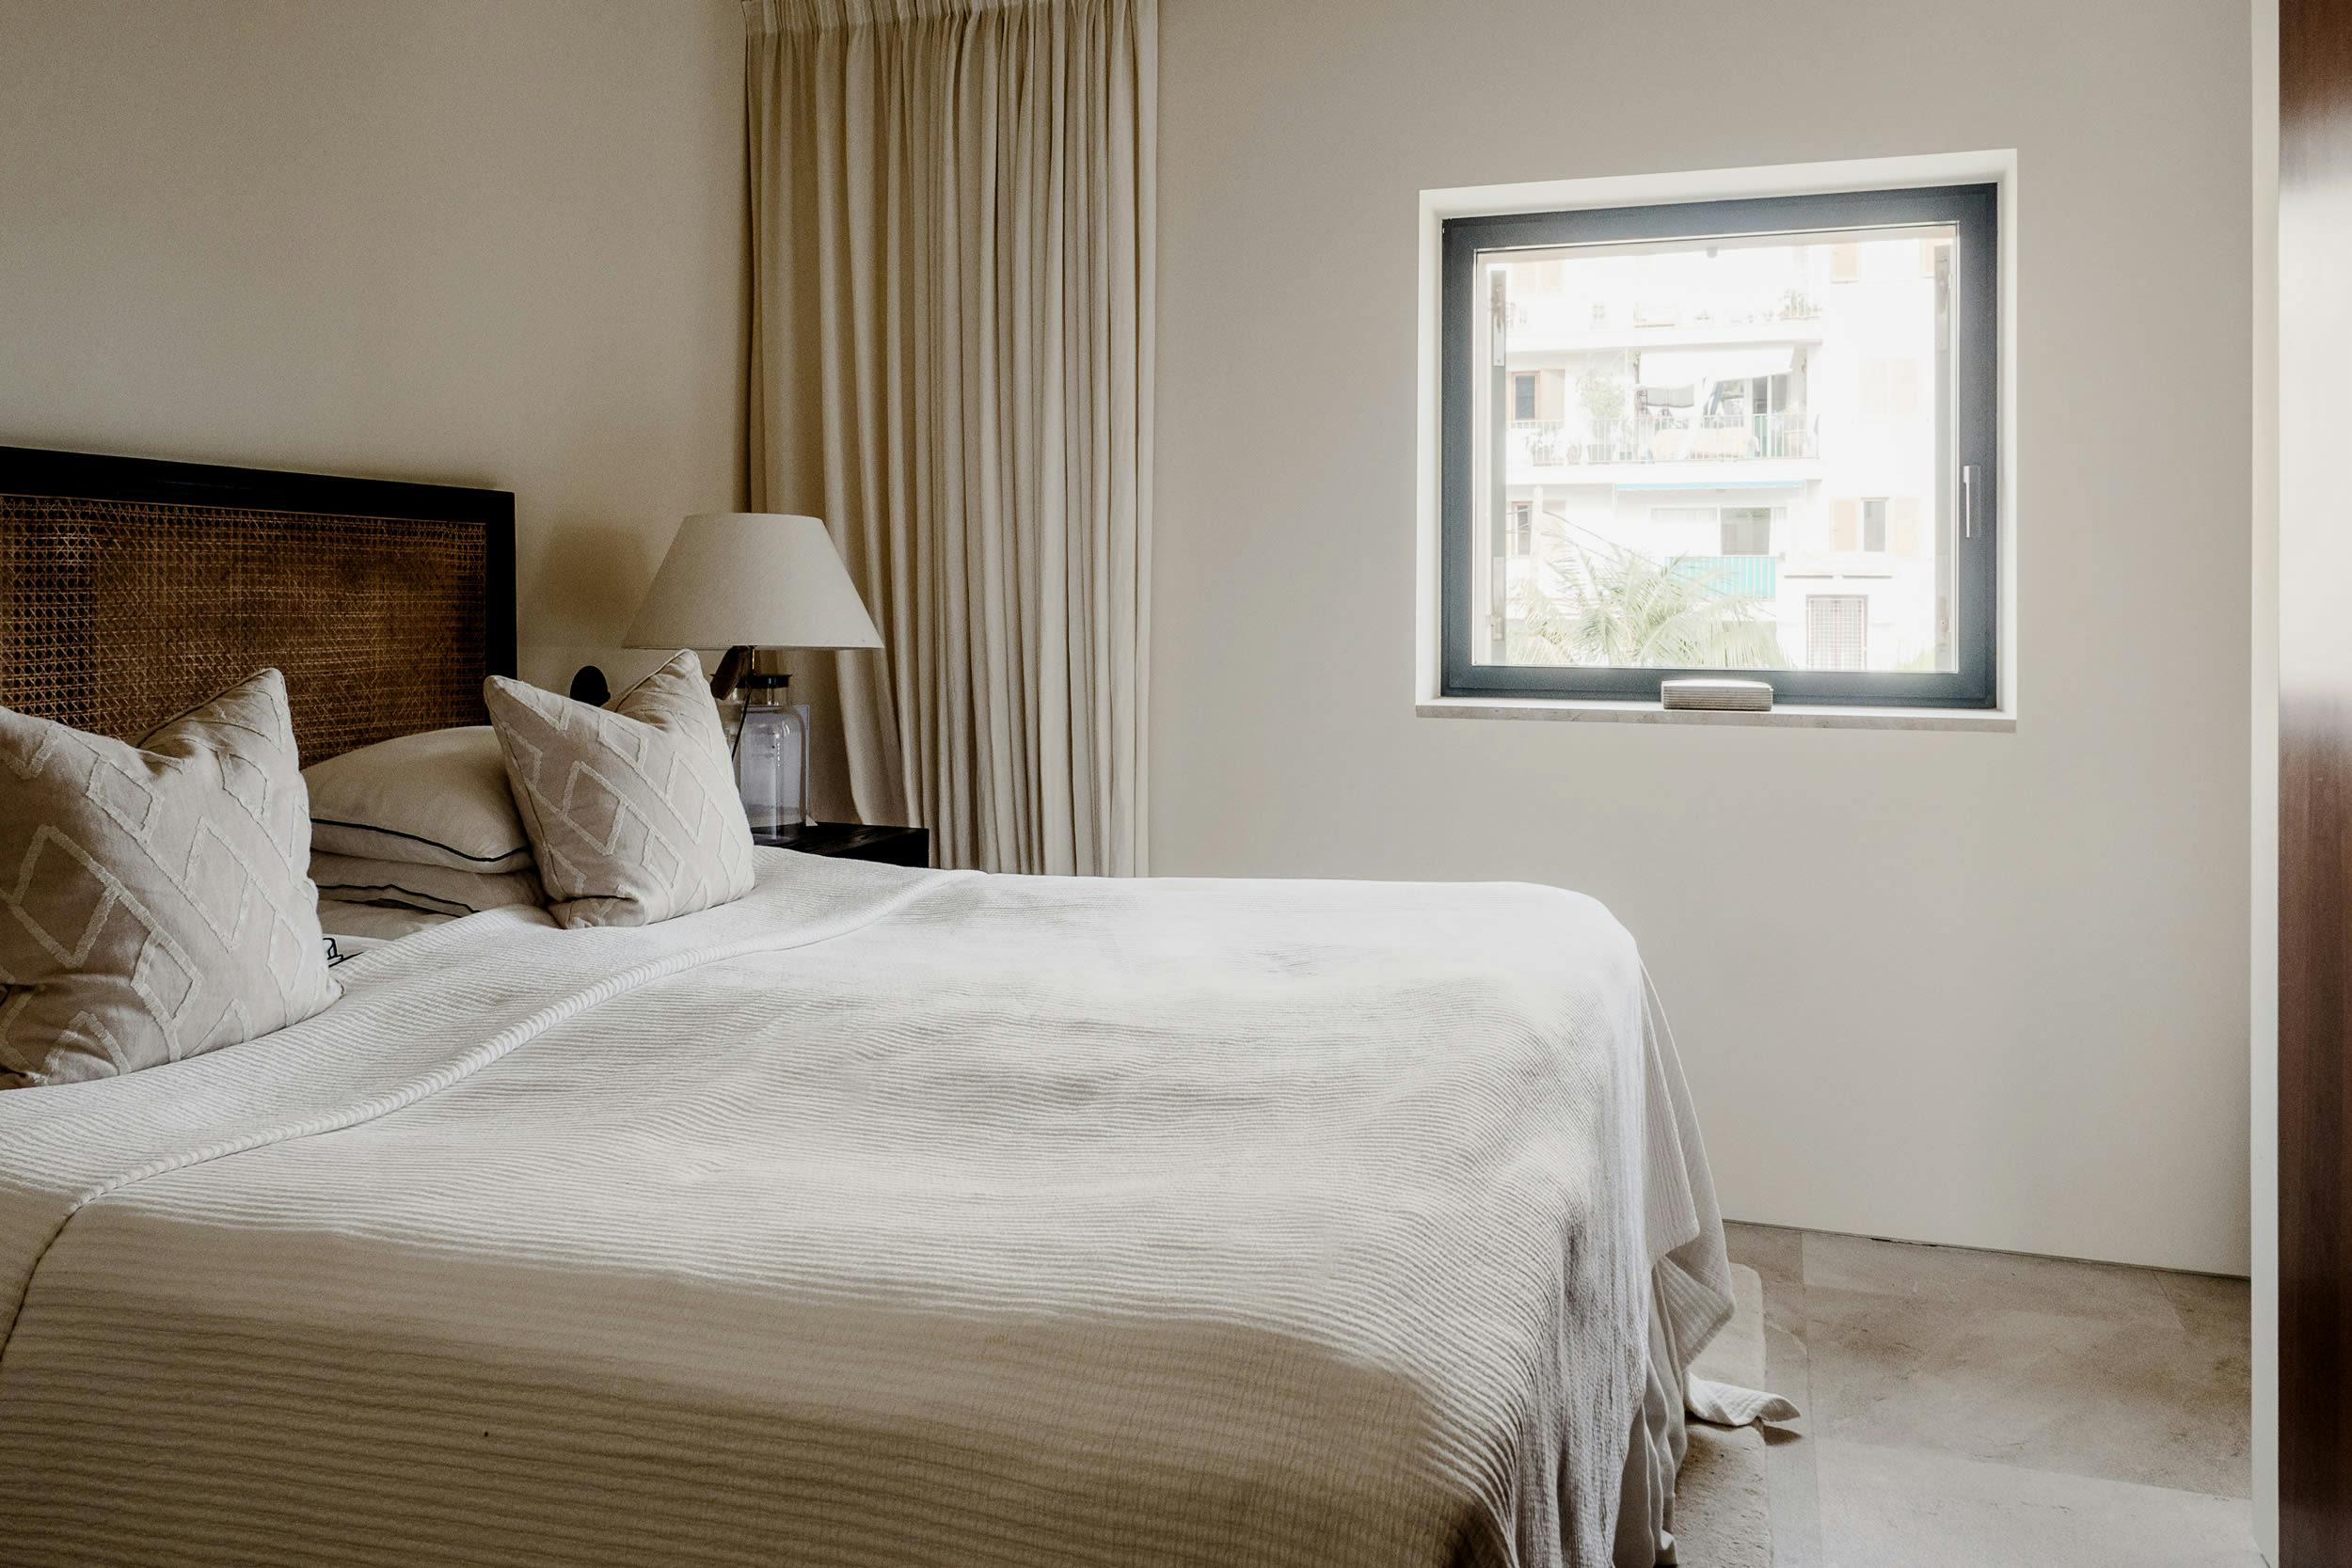 The image features a large, neatly made bed with white sheets and pillows in a hotel room.